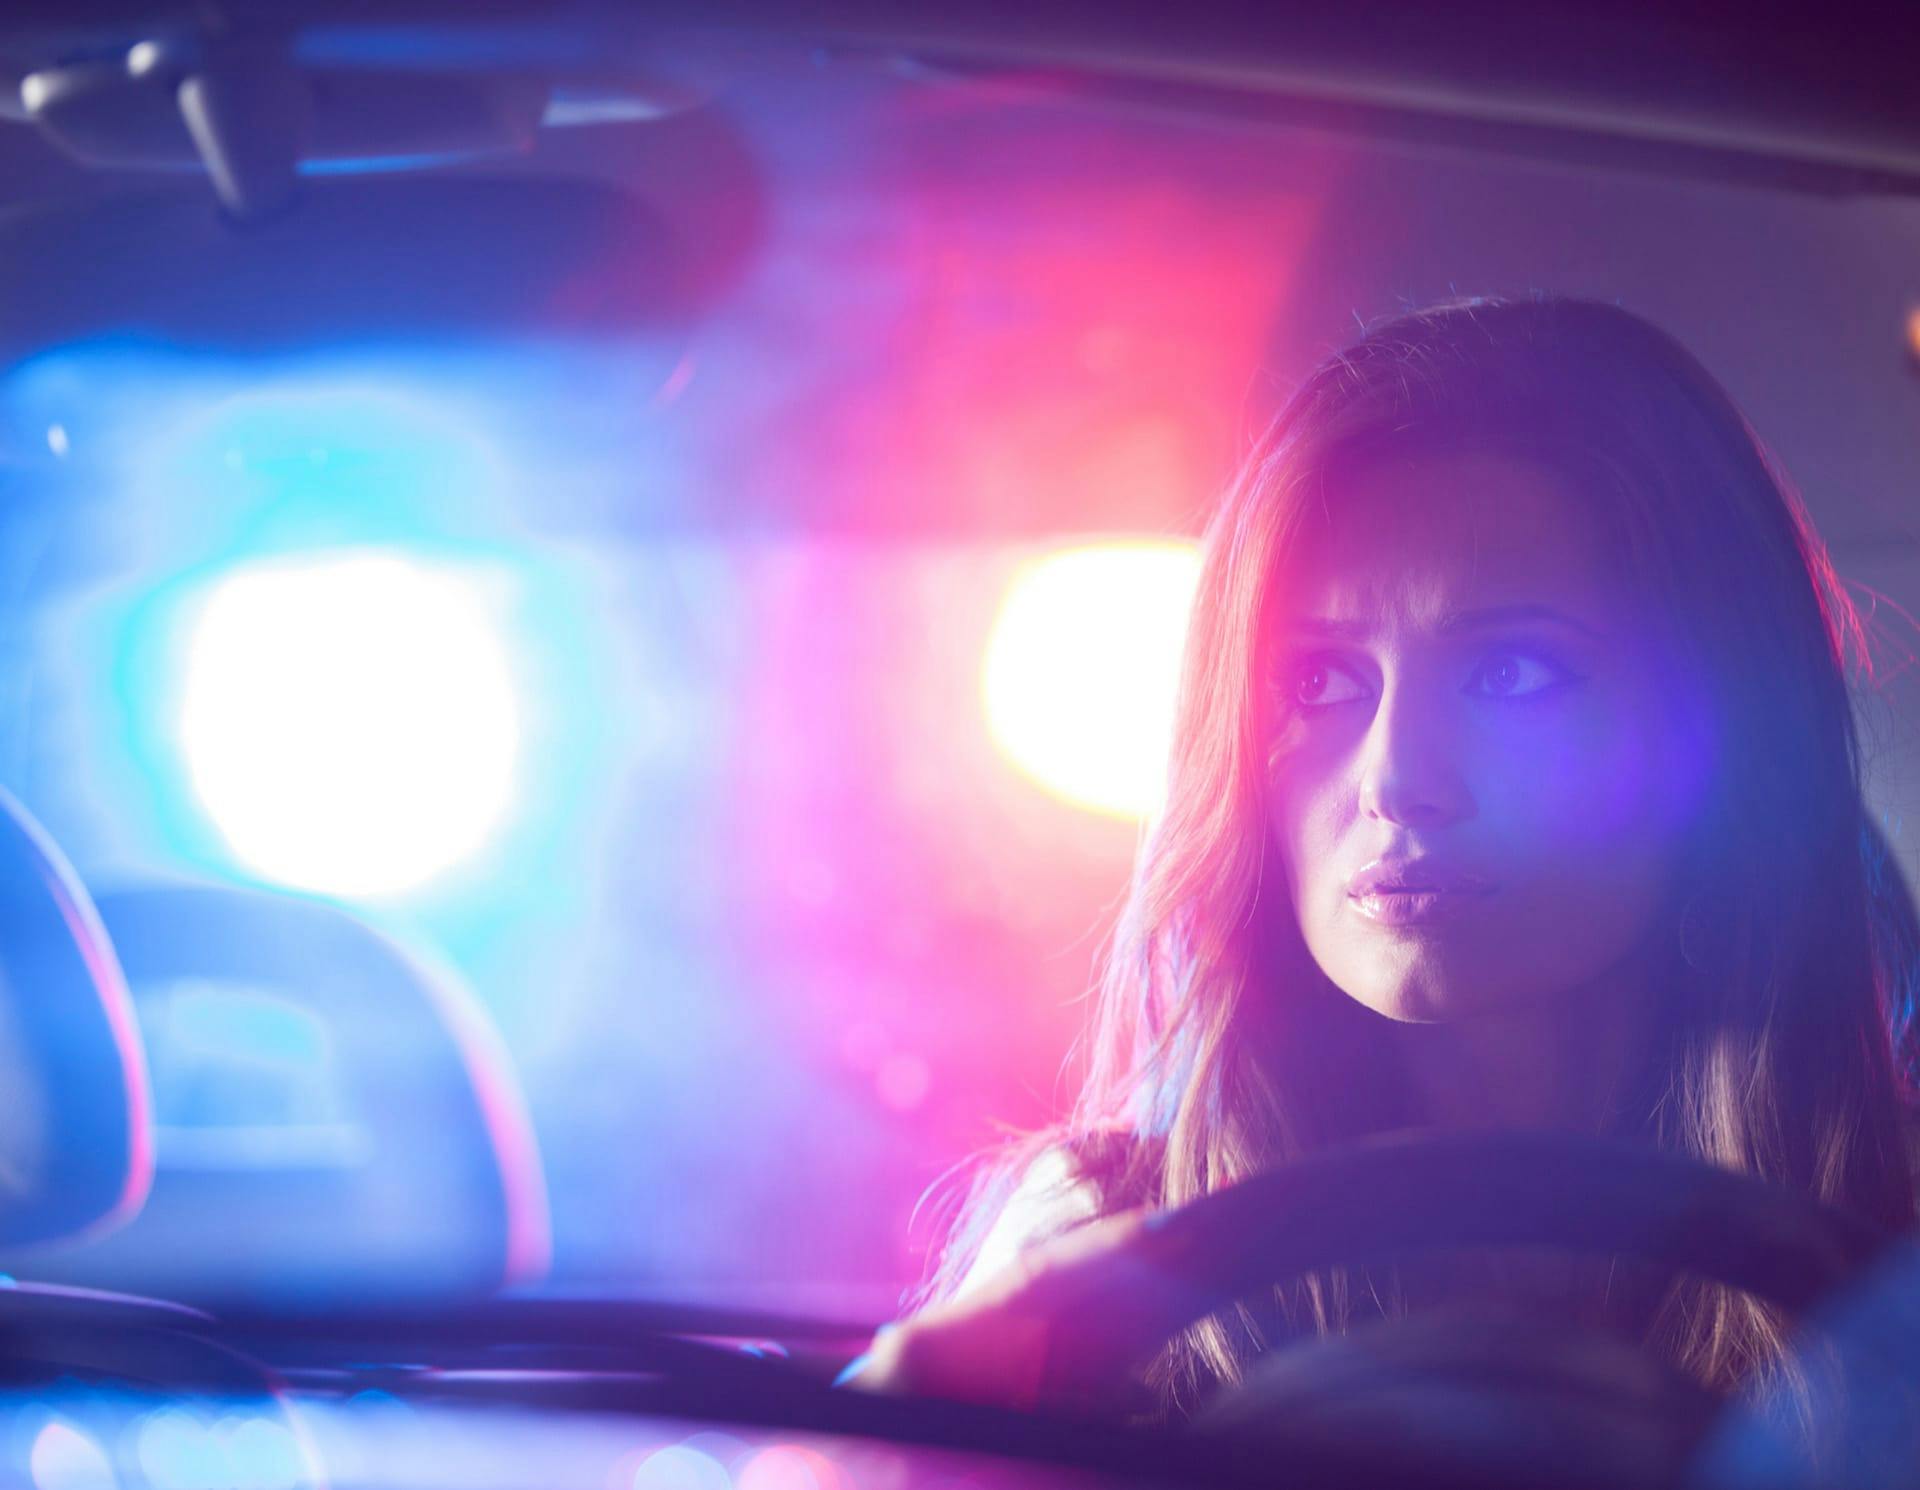 Woman in car with police lights in the background